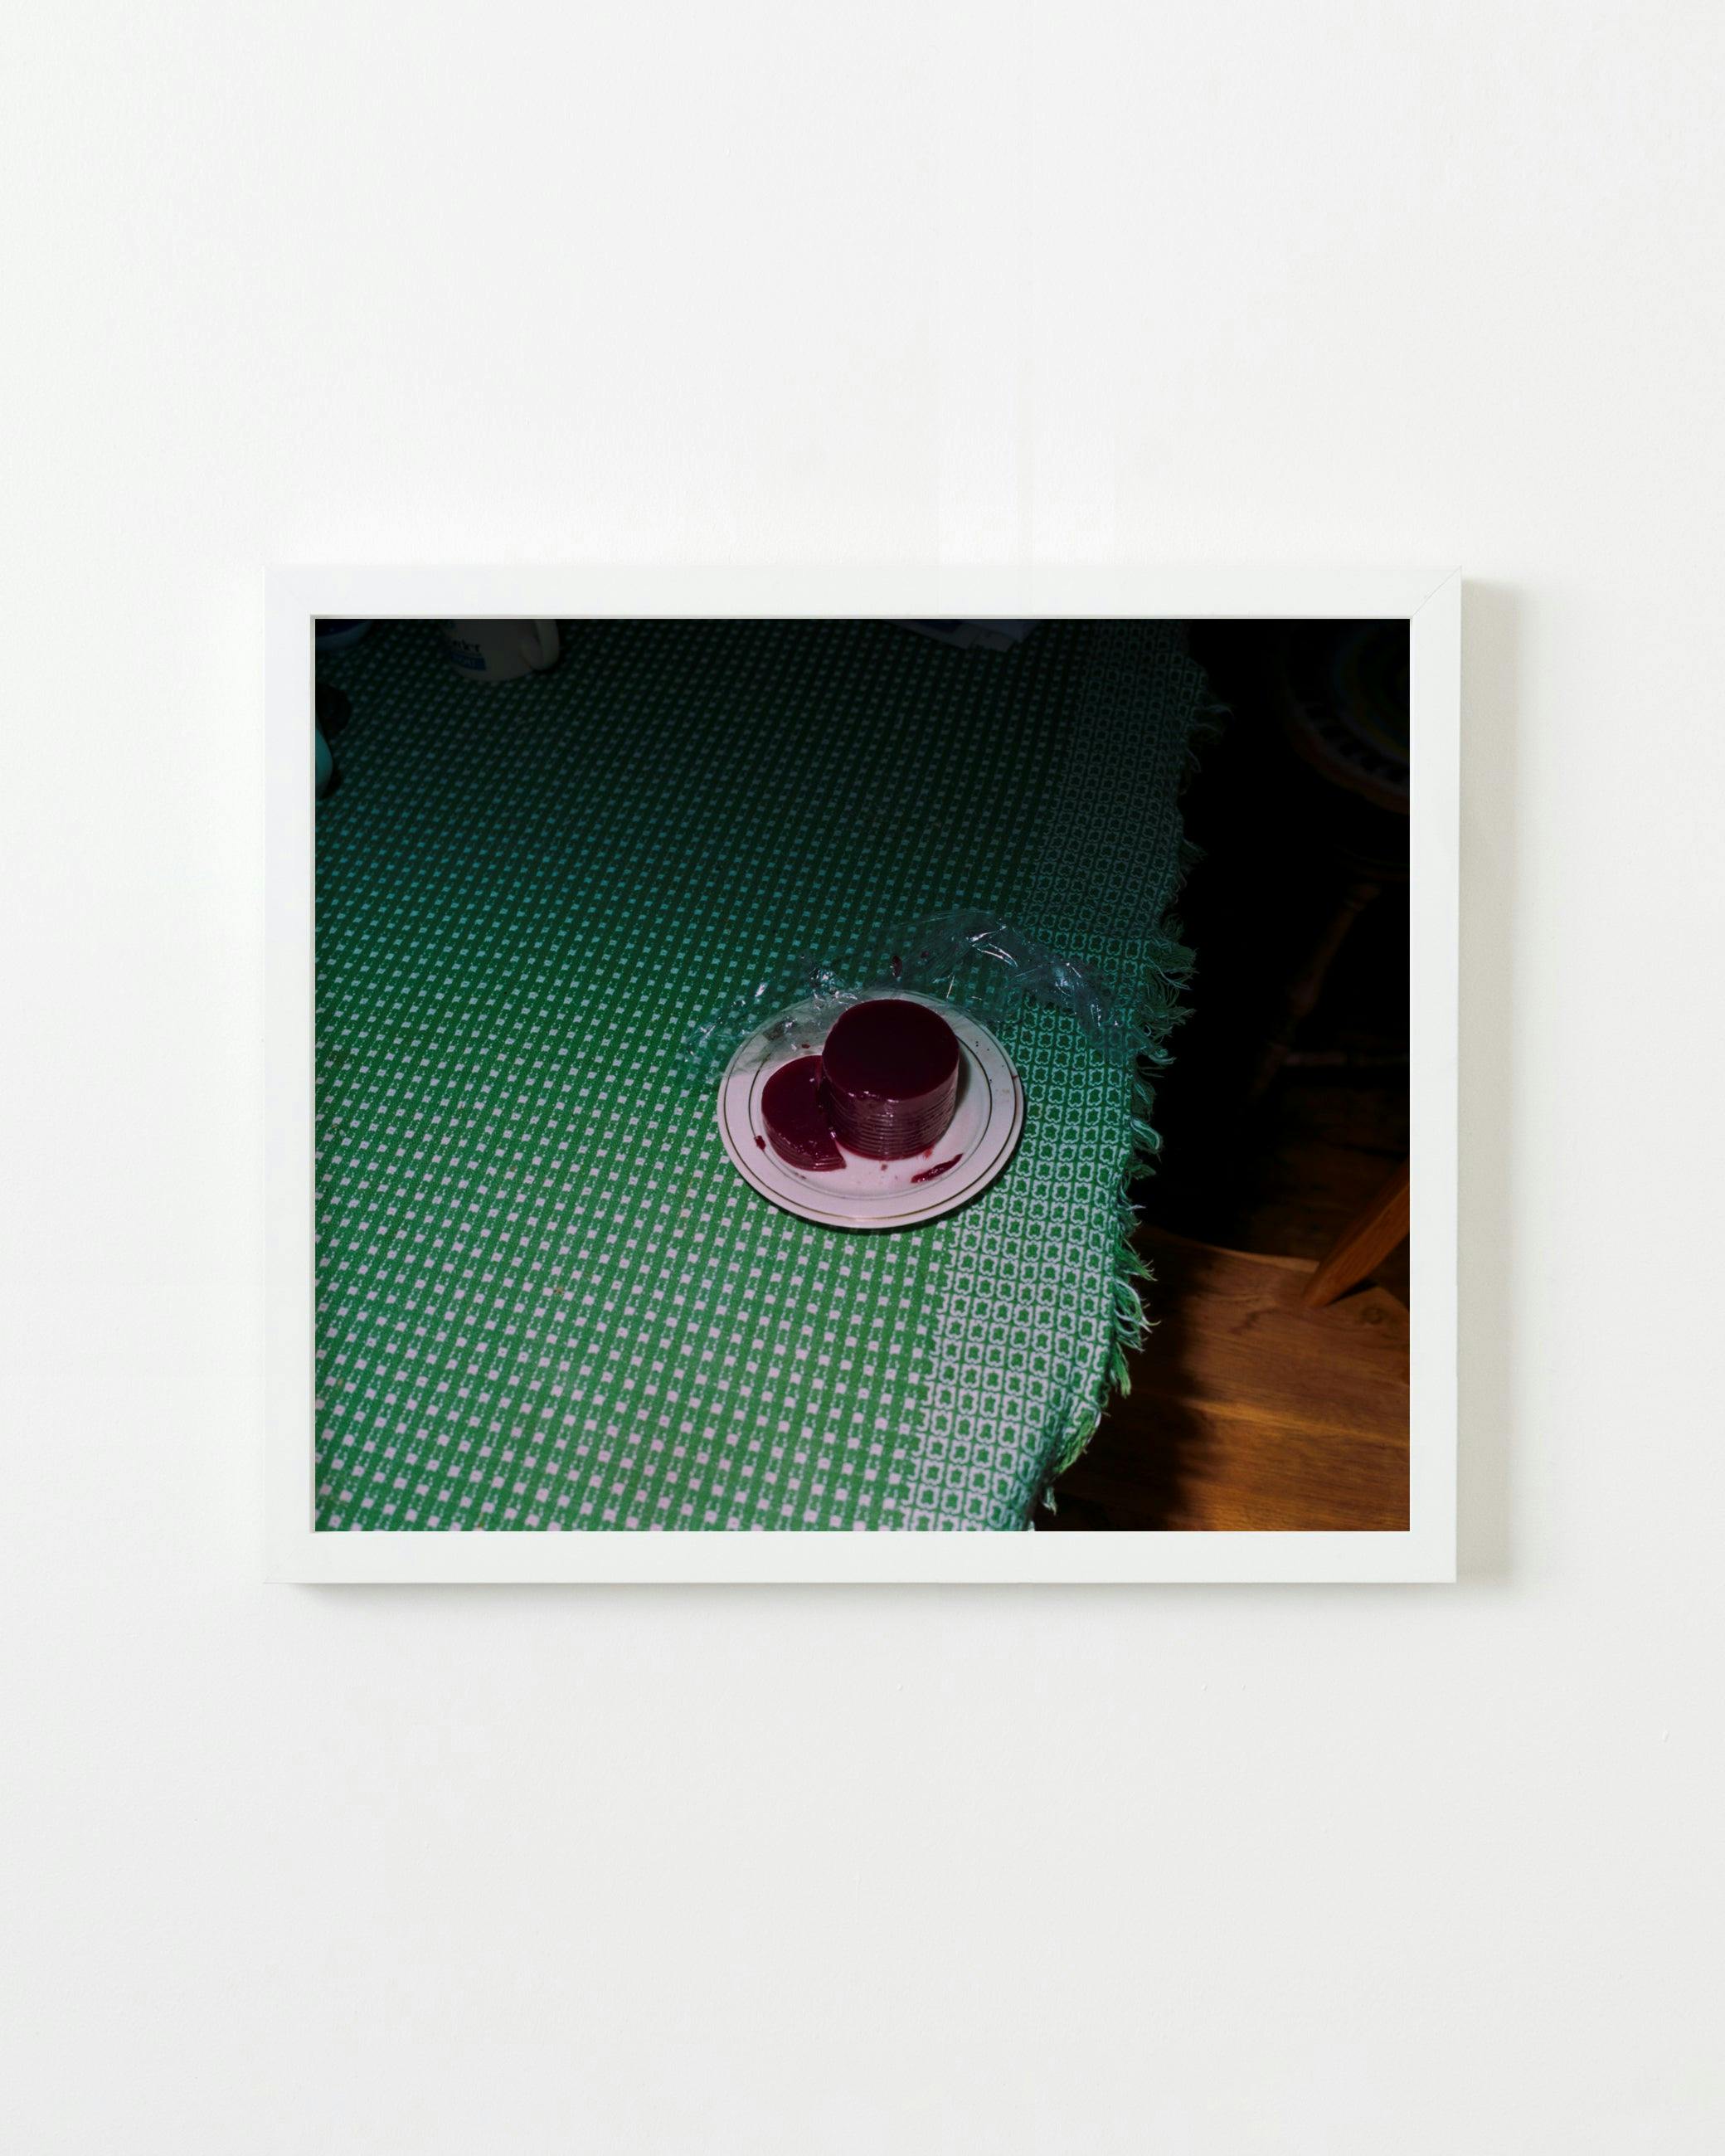 Photography by Nick Meyer titled "Cranberry Jelly, Conway".